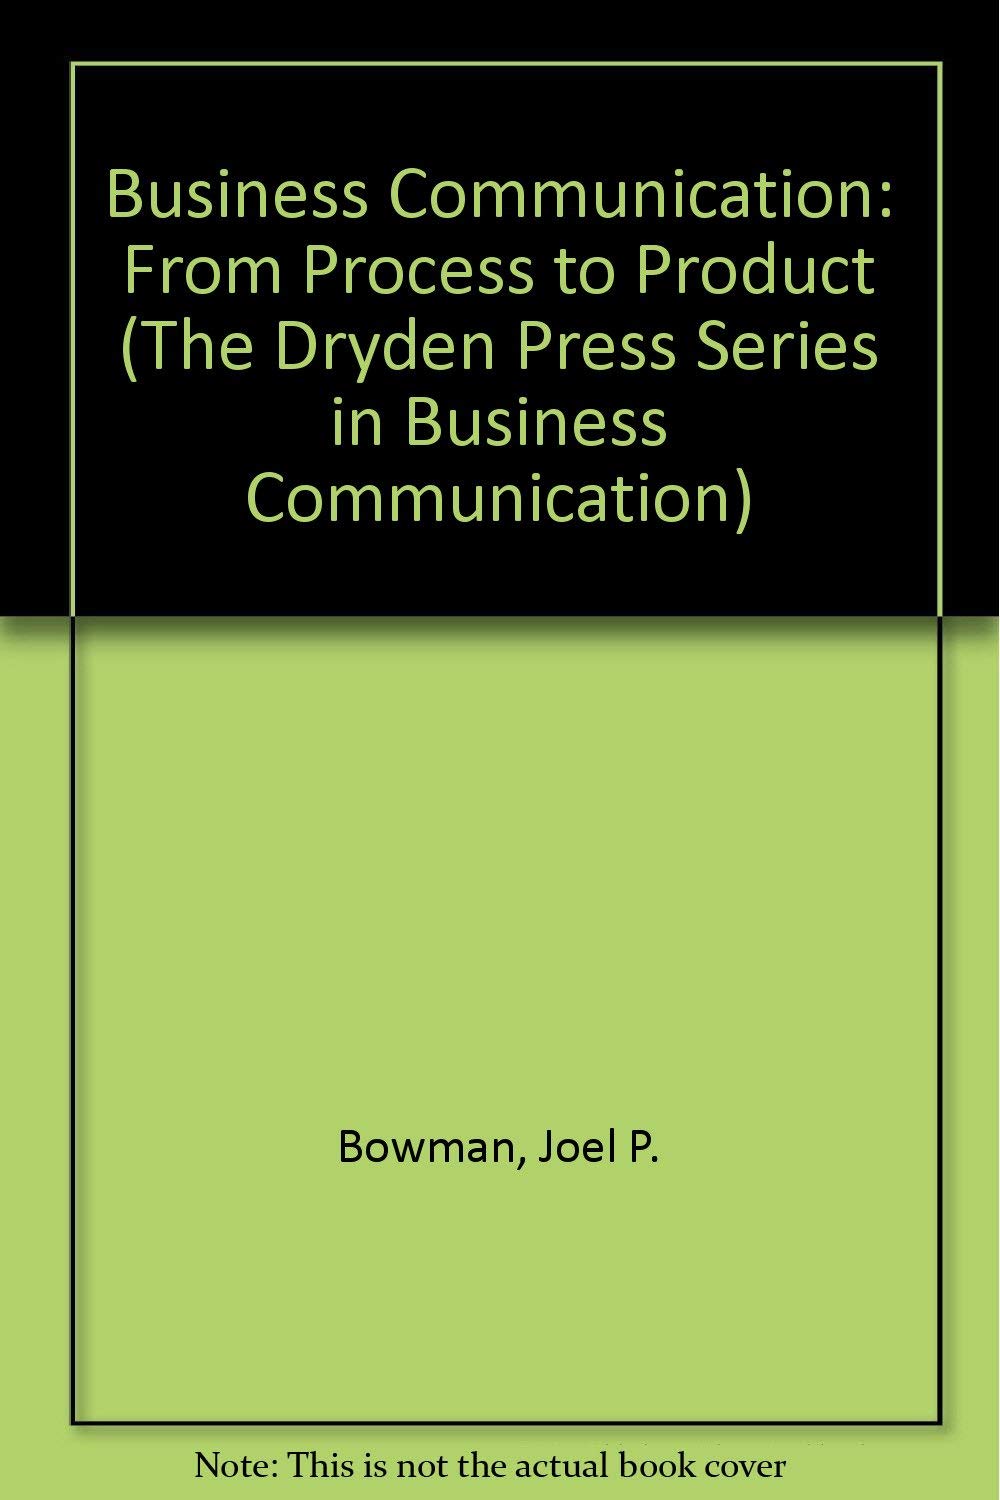 Book Cover Business Communication: From Process to Product (The Dryden Press Series in Business Communication)